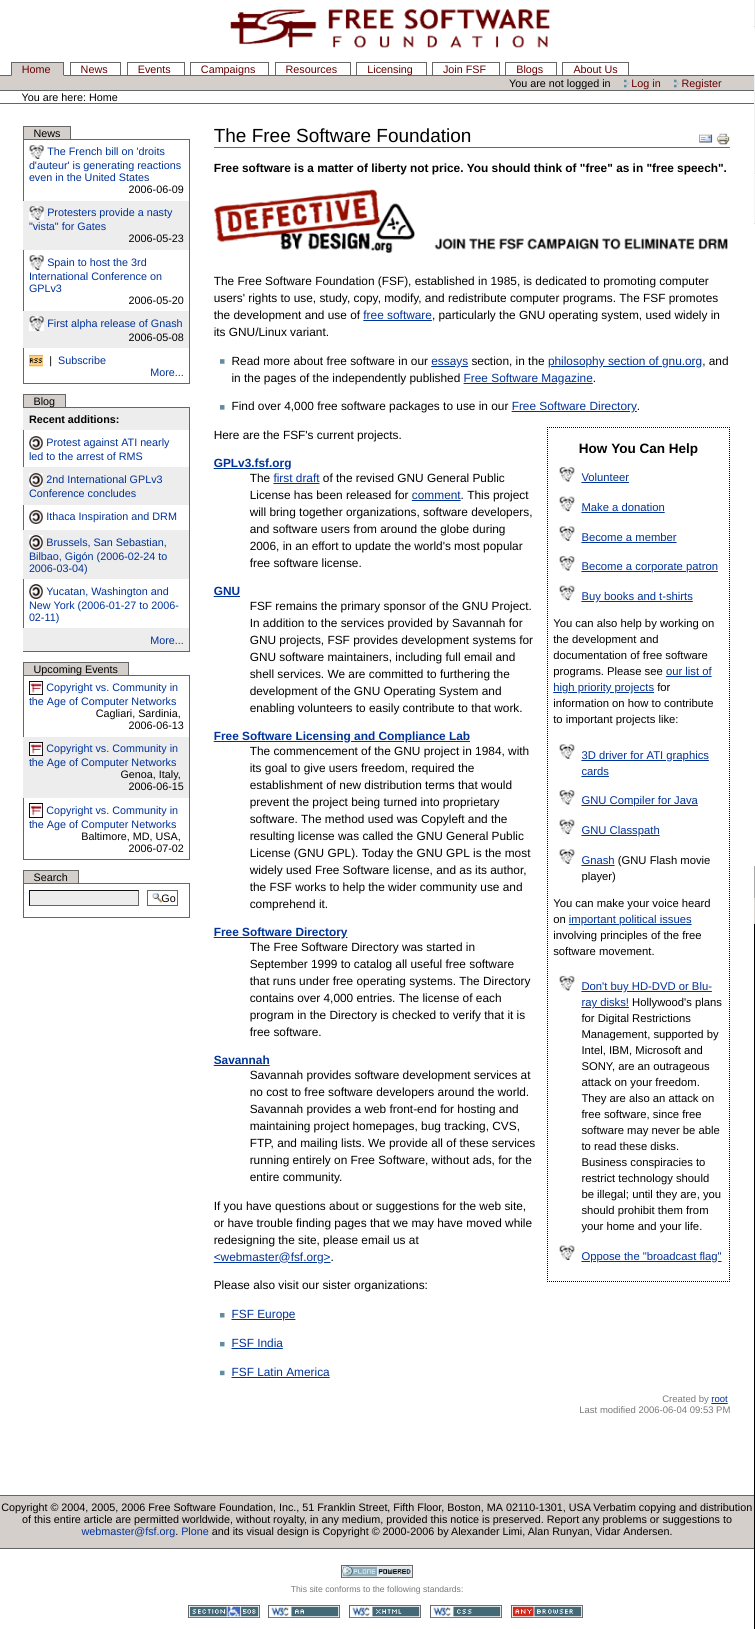 The FSF's Web site in 2006